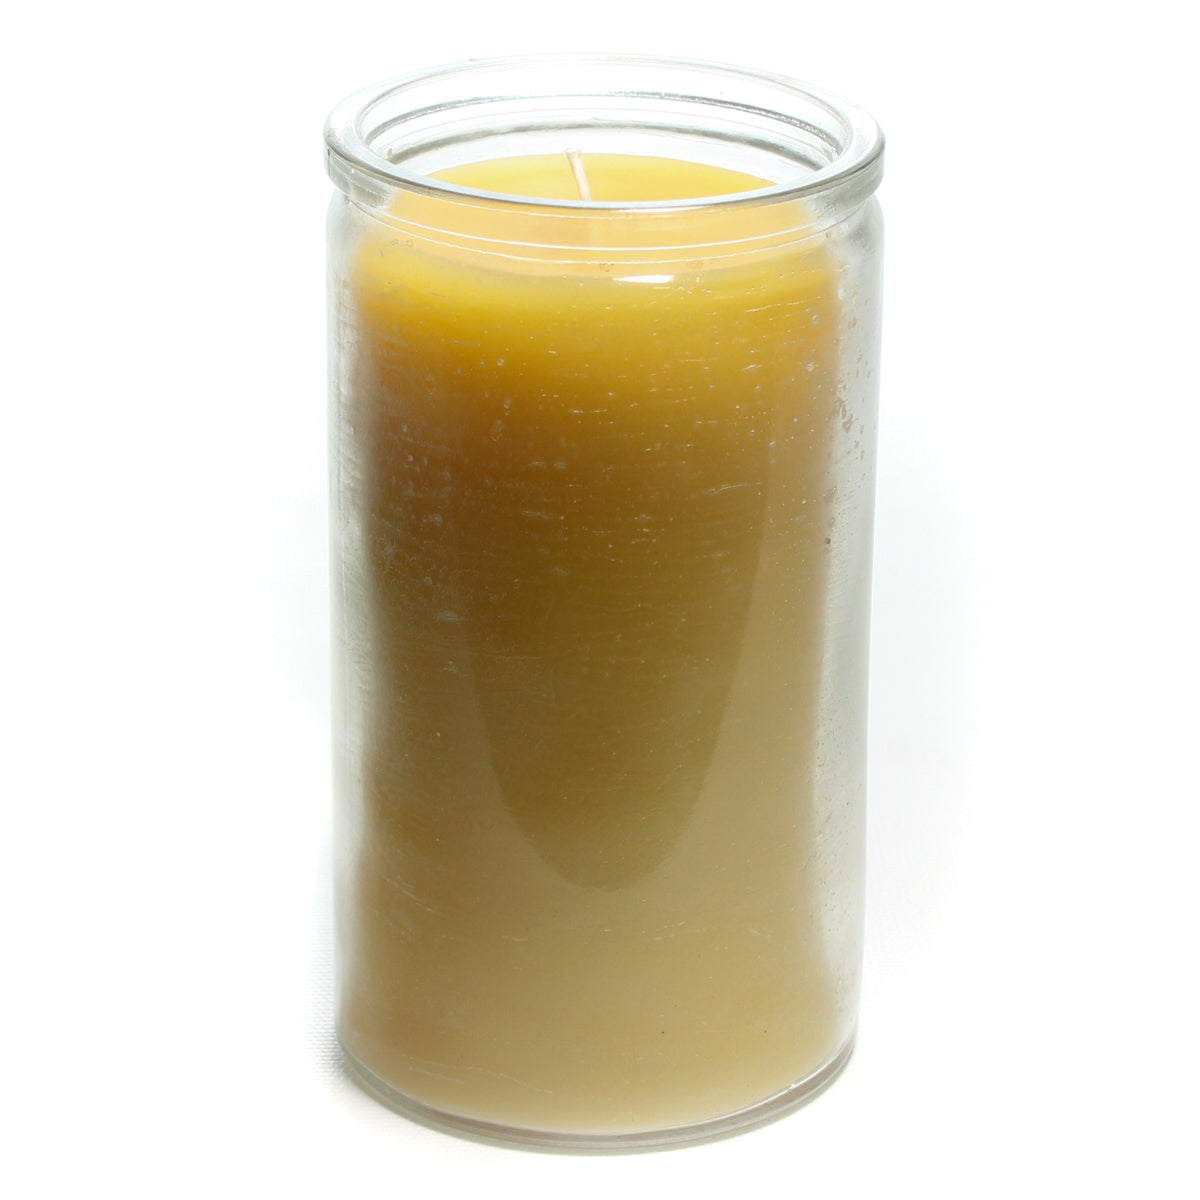 Bluecorn Beeswax 100% Pure Beeswax Clear 16oz Glass Candle. Burn Time: 80 hours. Wax is golden in color with a light honey scent. Made with 100% Pure Beeswax and a 100% pure cotton wick, no lead. Candles are paraffin free, clean burning and non-toxic. Features 16oz candle with Bluecorn Beeswax hang tag printed on white 100% recyled paper with gold foil. For best burn, burn candle until wax pool reaches glass wall and trim wick to 1/4 before lighting. Clearance items might have a blemish or air bubble.